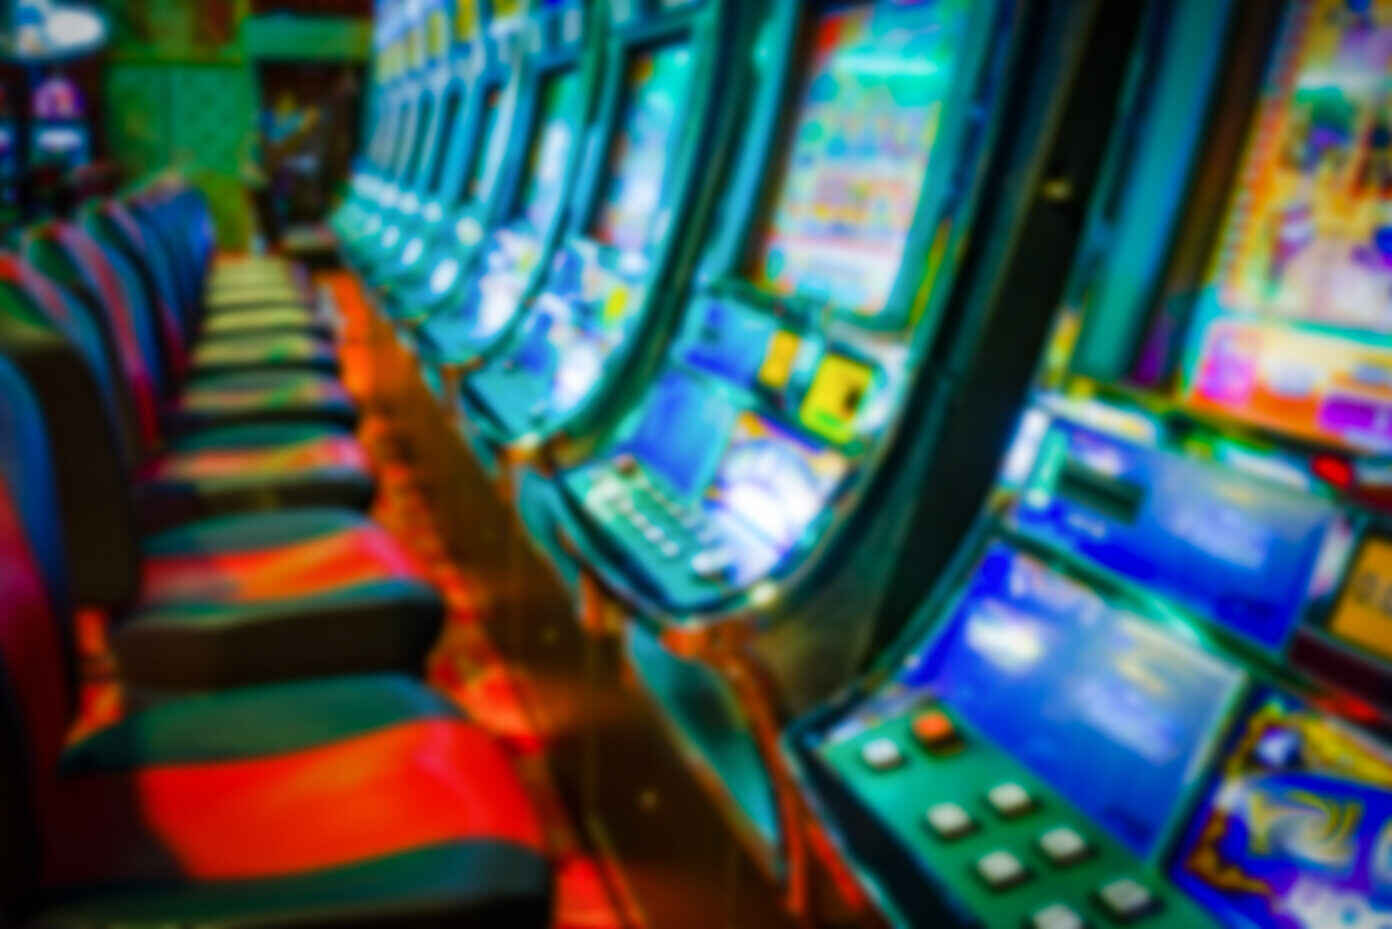 Social casino games can help – or harm – problem gamblers